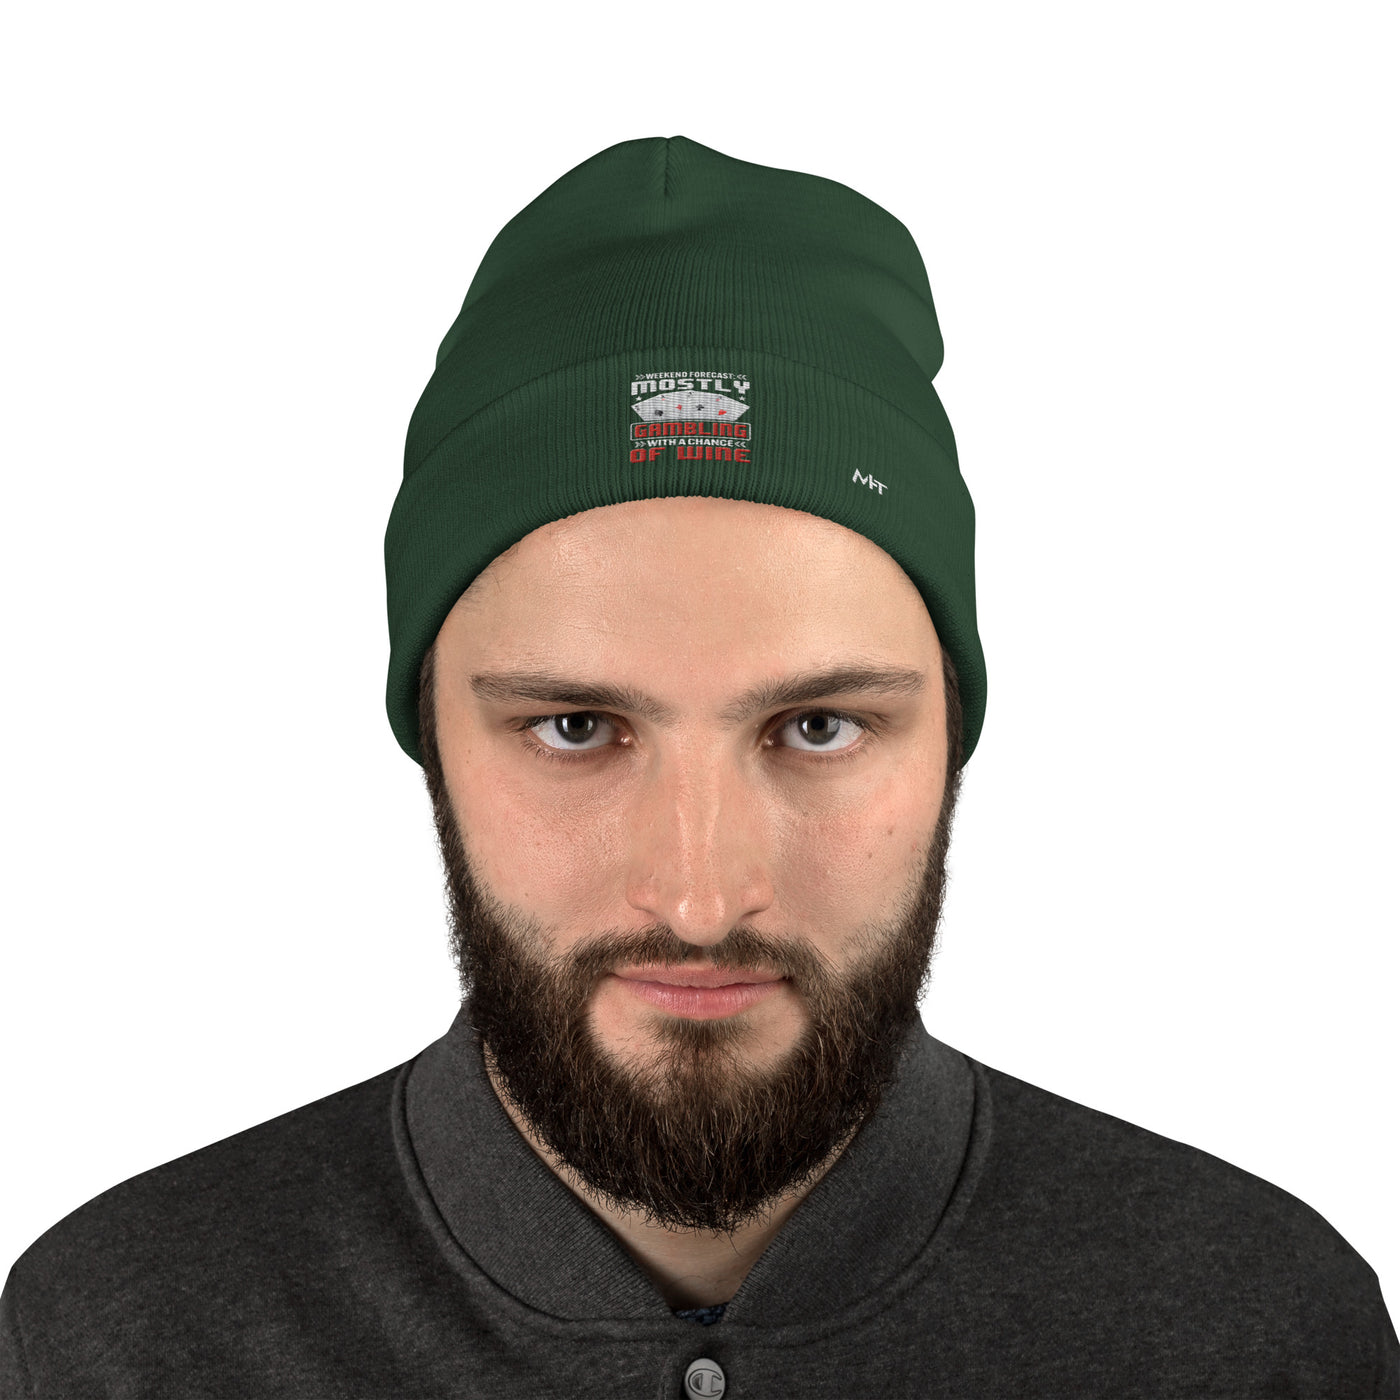 Weekend Forecast Mostly Gambling With a Chance of Wine - Embroidered Beanie